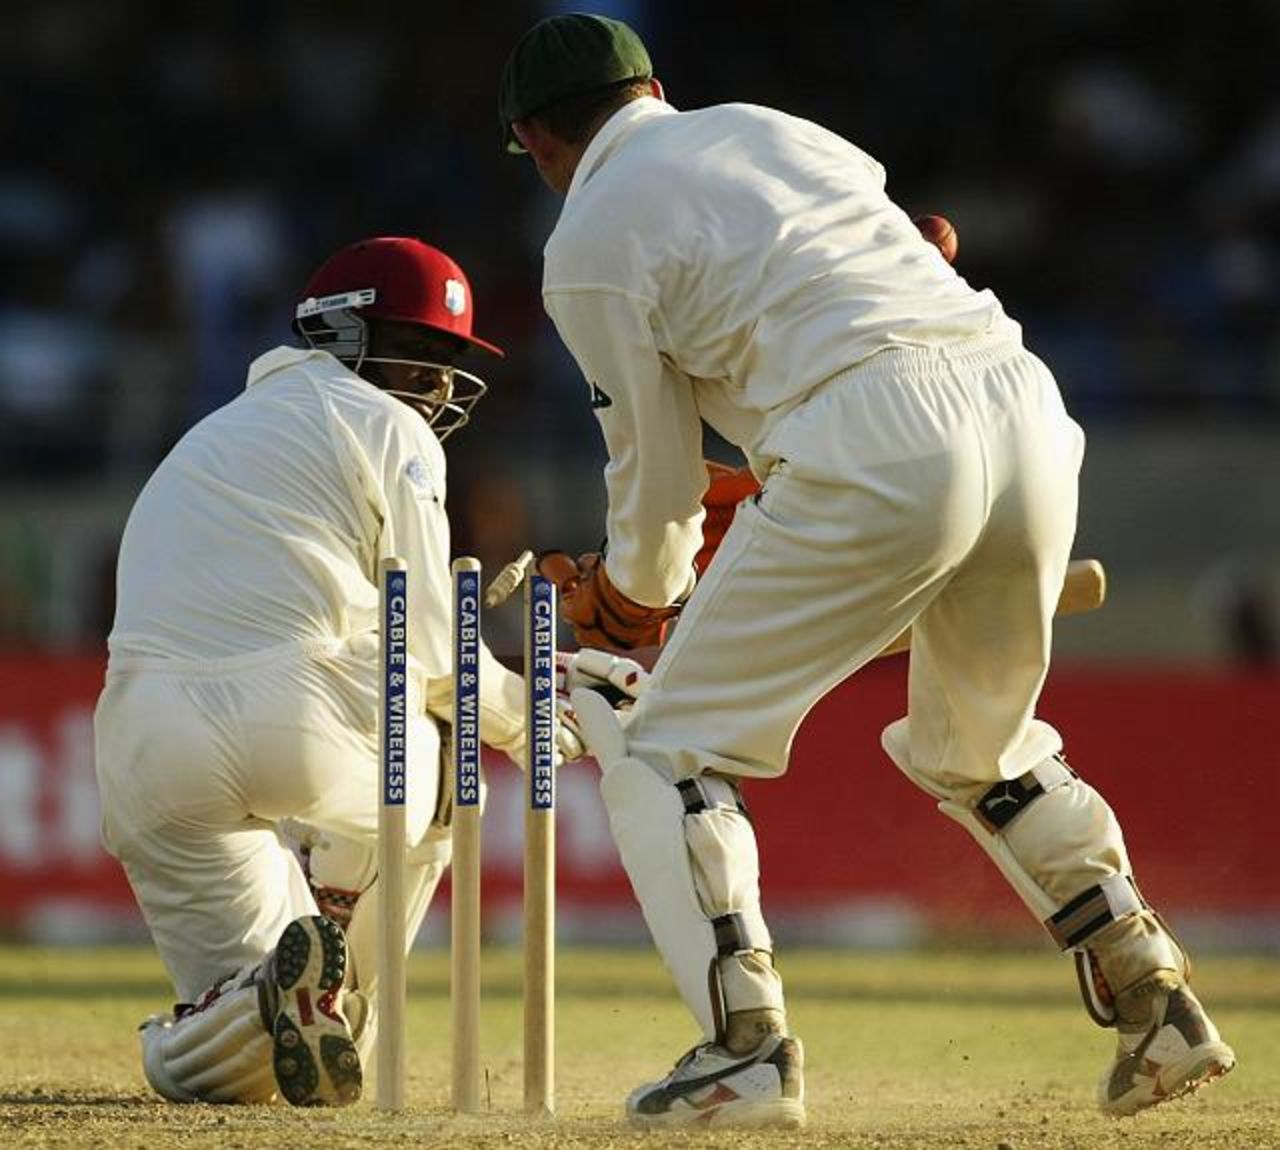 Brian Lara of the West Indies is bowled by Brad Hogg of Australia for 91 during day two of the Second Test between the West Indies and Australia on April 20, 2003 at Queens Park Oval in Port of Spain, Trinidad.